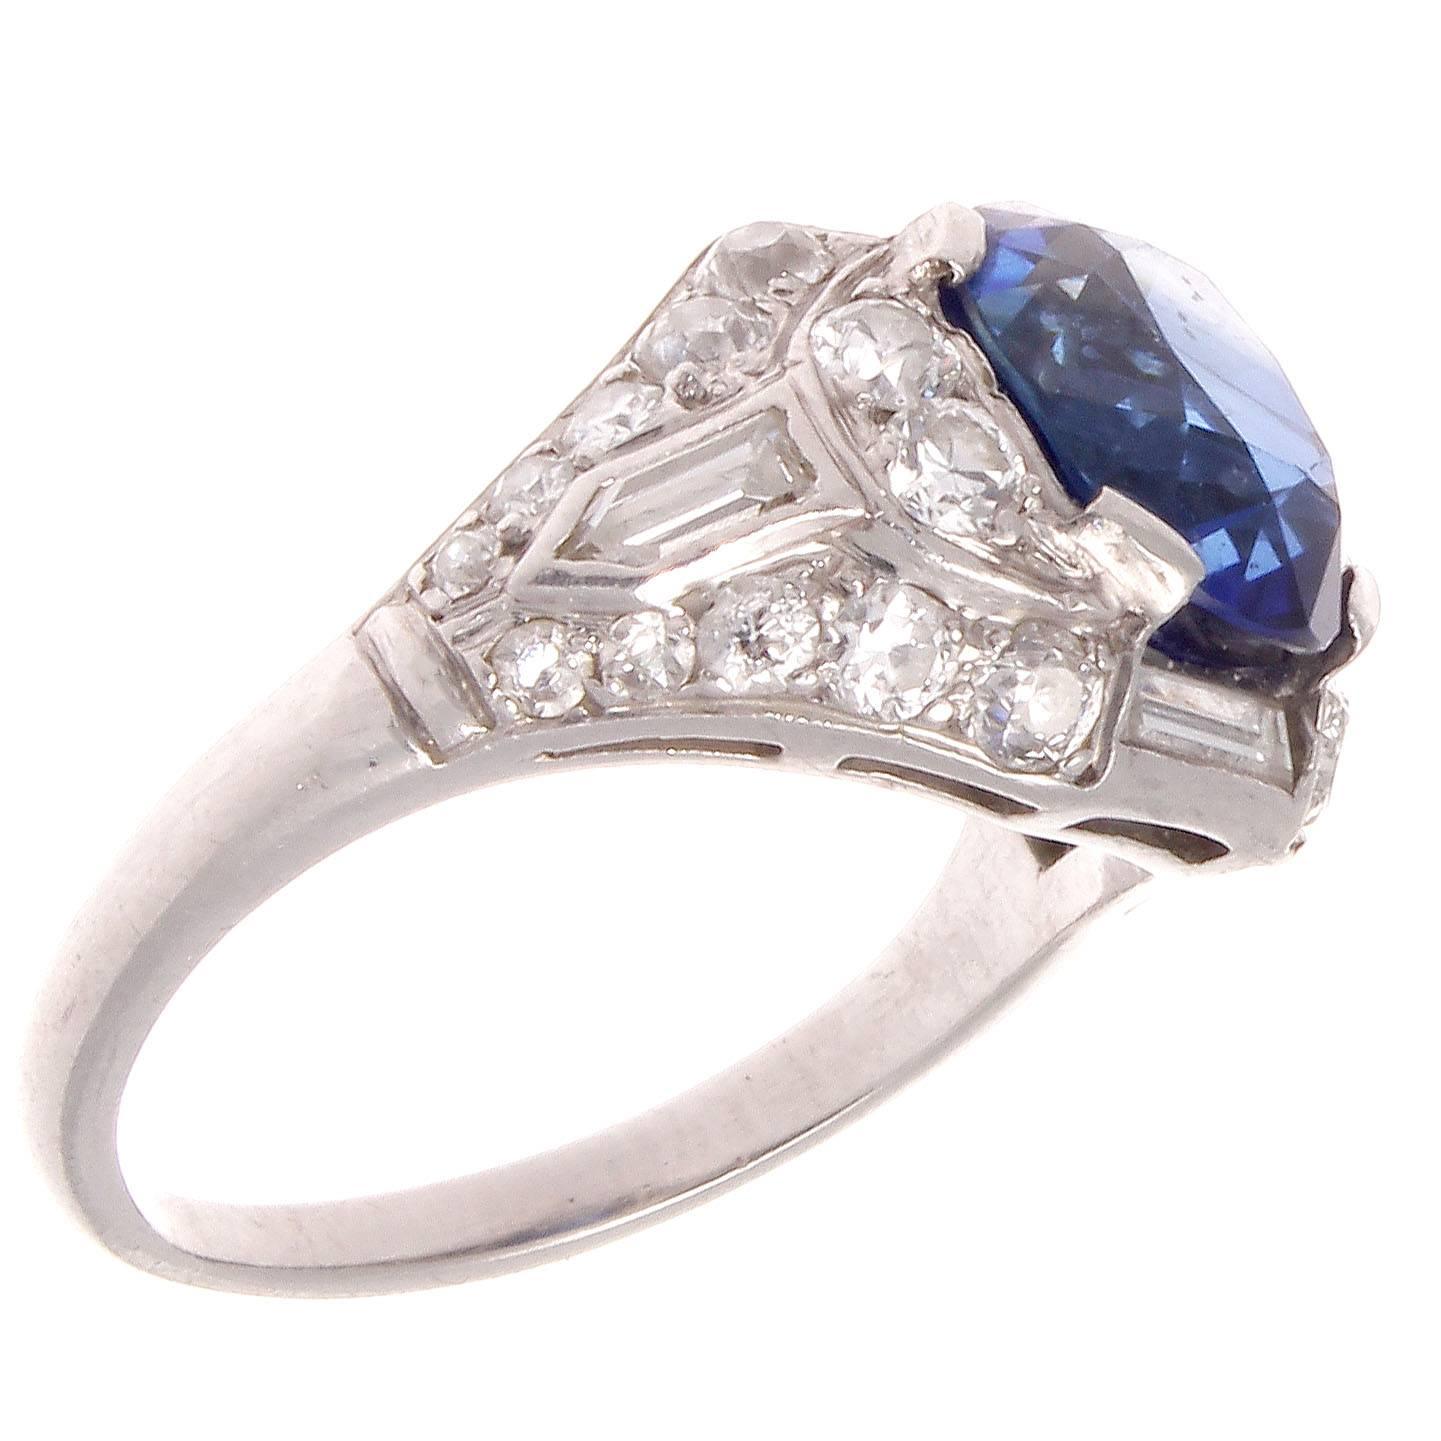 Art Deco brilliance is predicated from the combination of color, symmetry and elegance that is portrayed through its unique designs. Featuring an approximately 4 carat royal blue sapphire that is considered as gem quality because of it's rich color